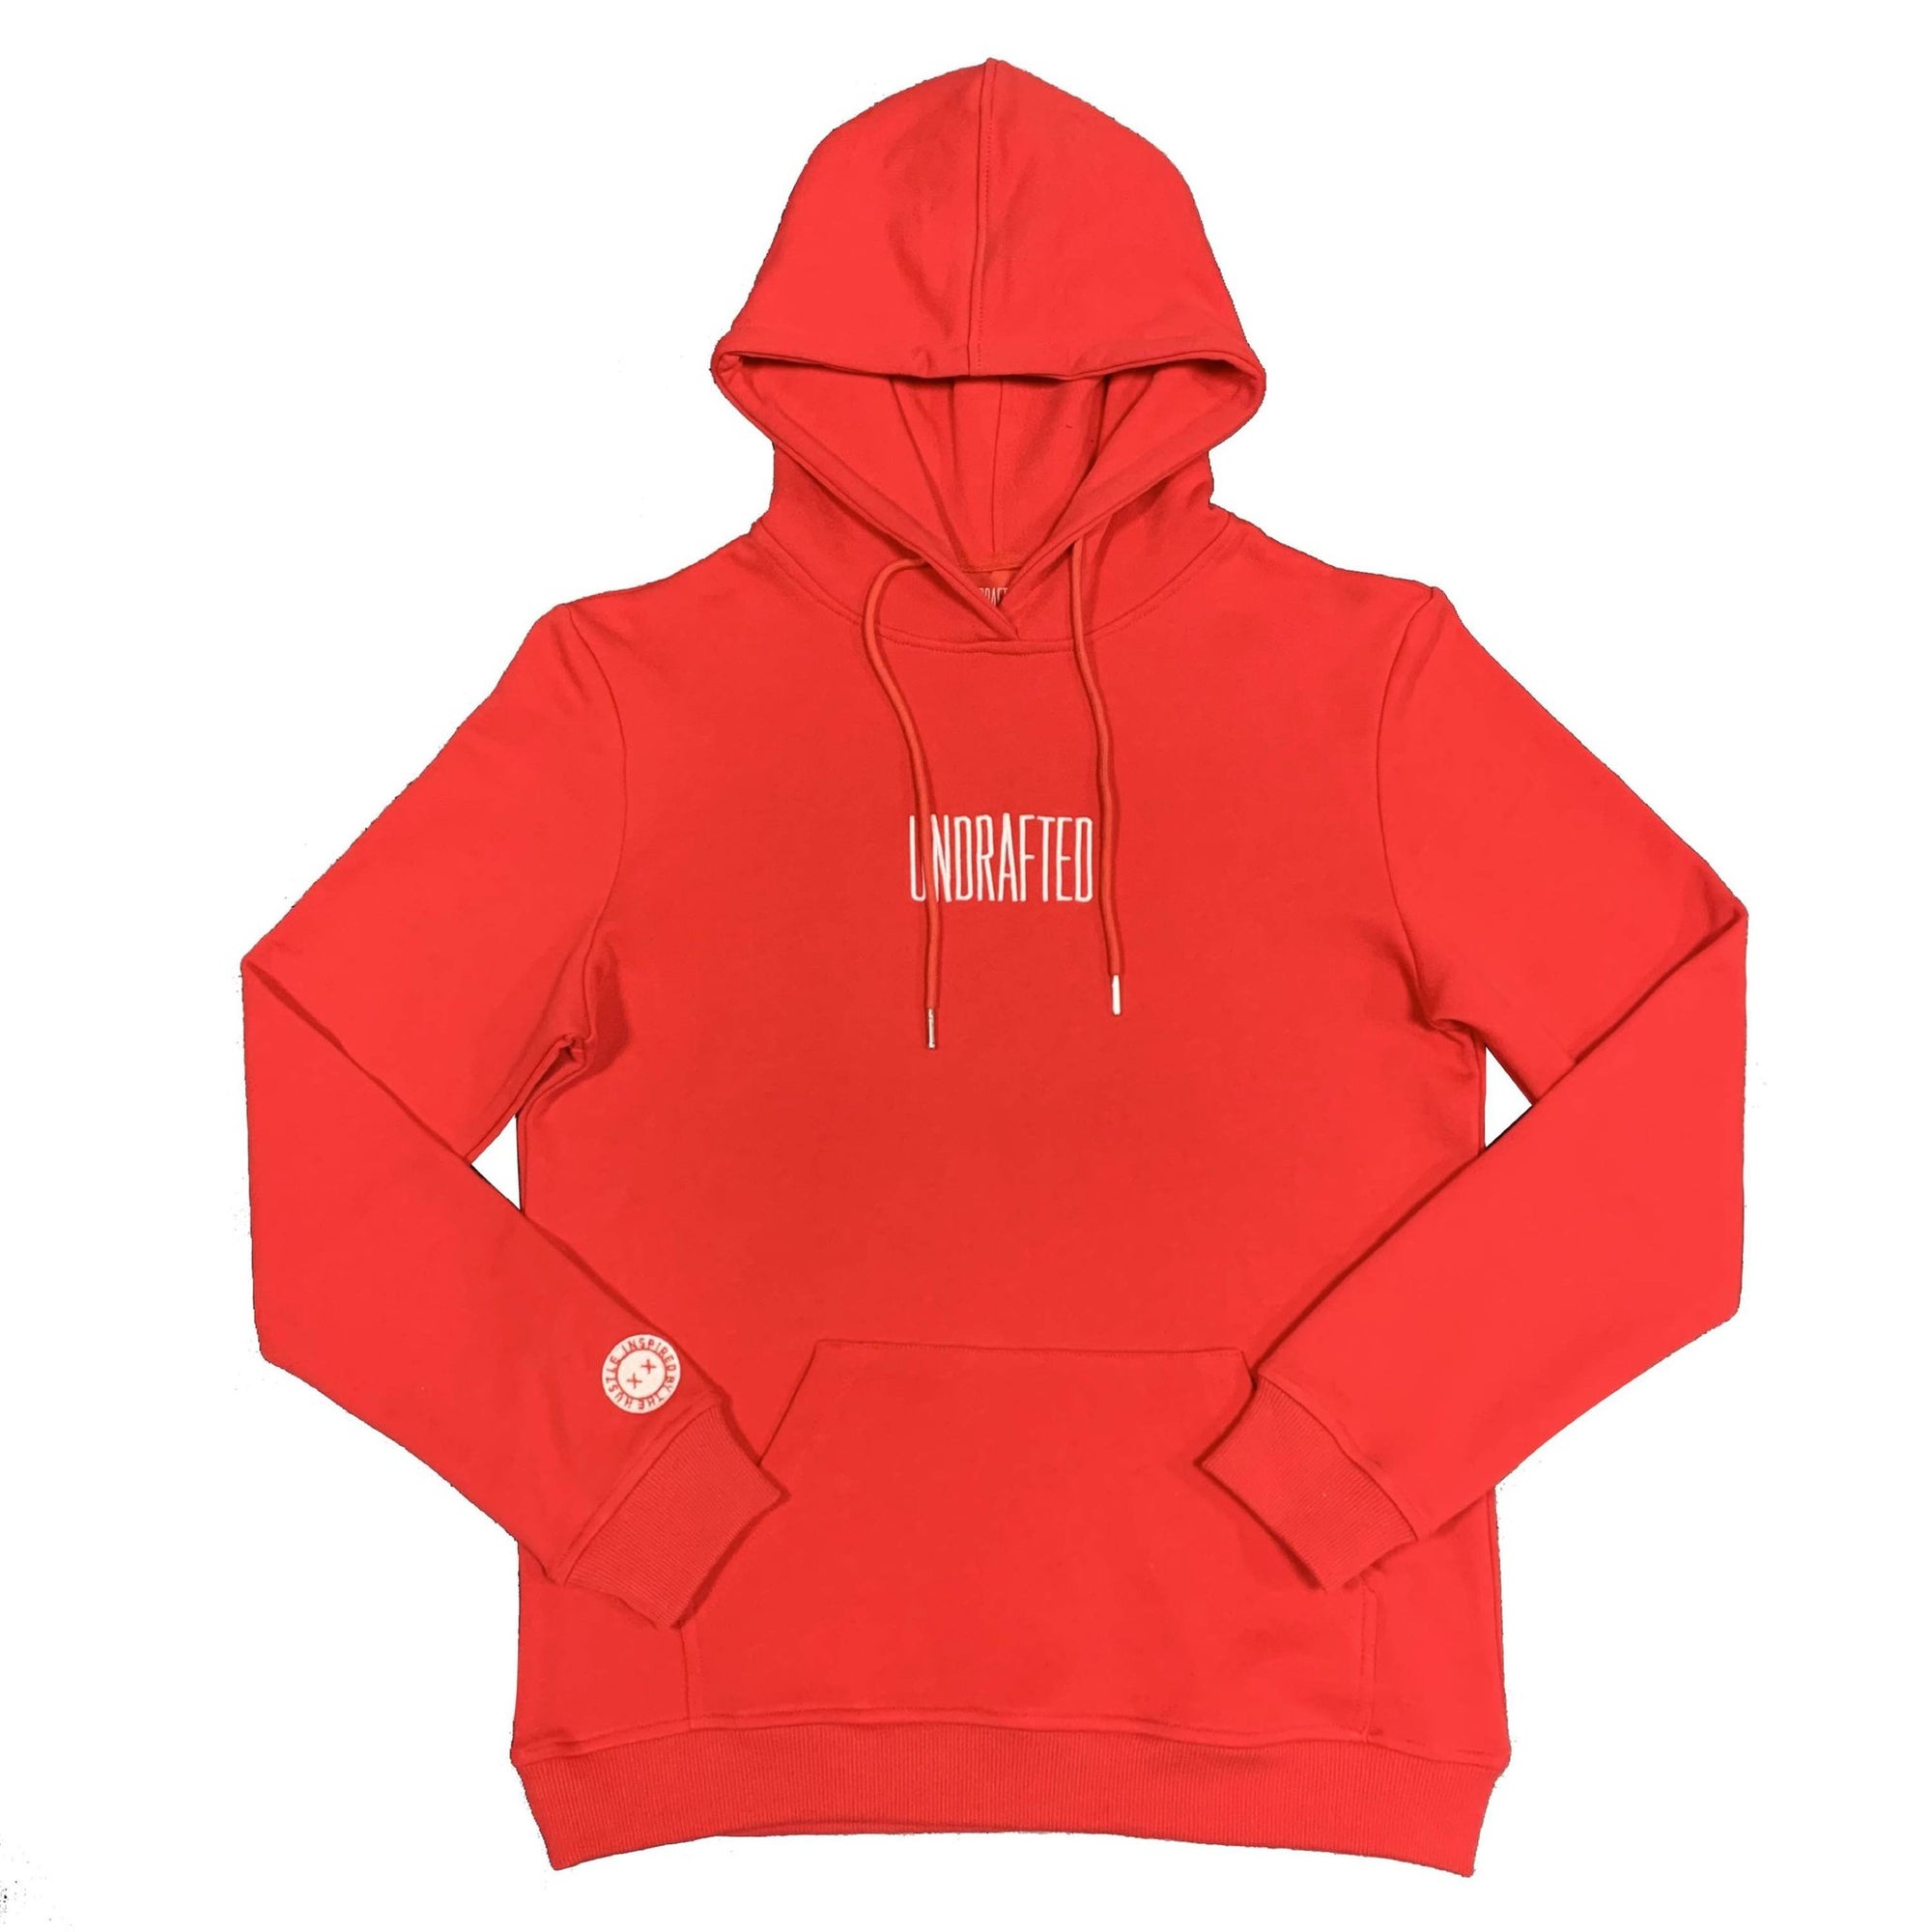 Undrafted Hoodie - Red/White